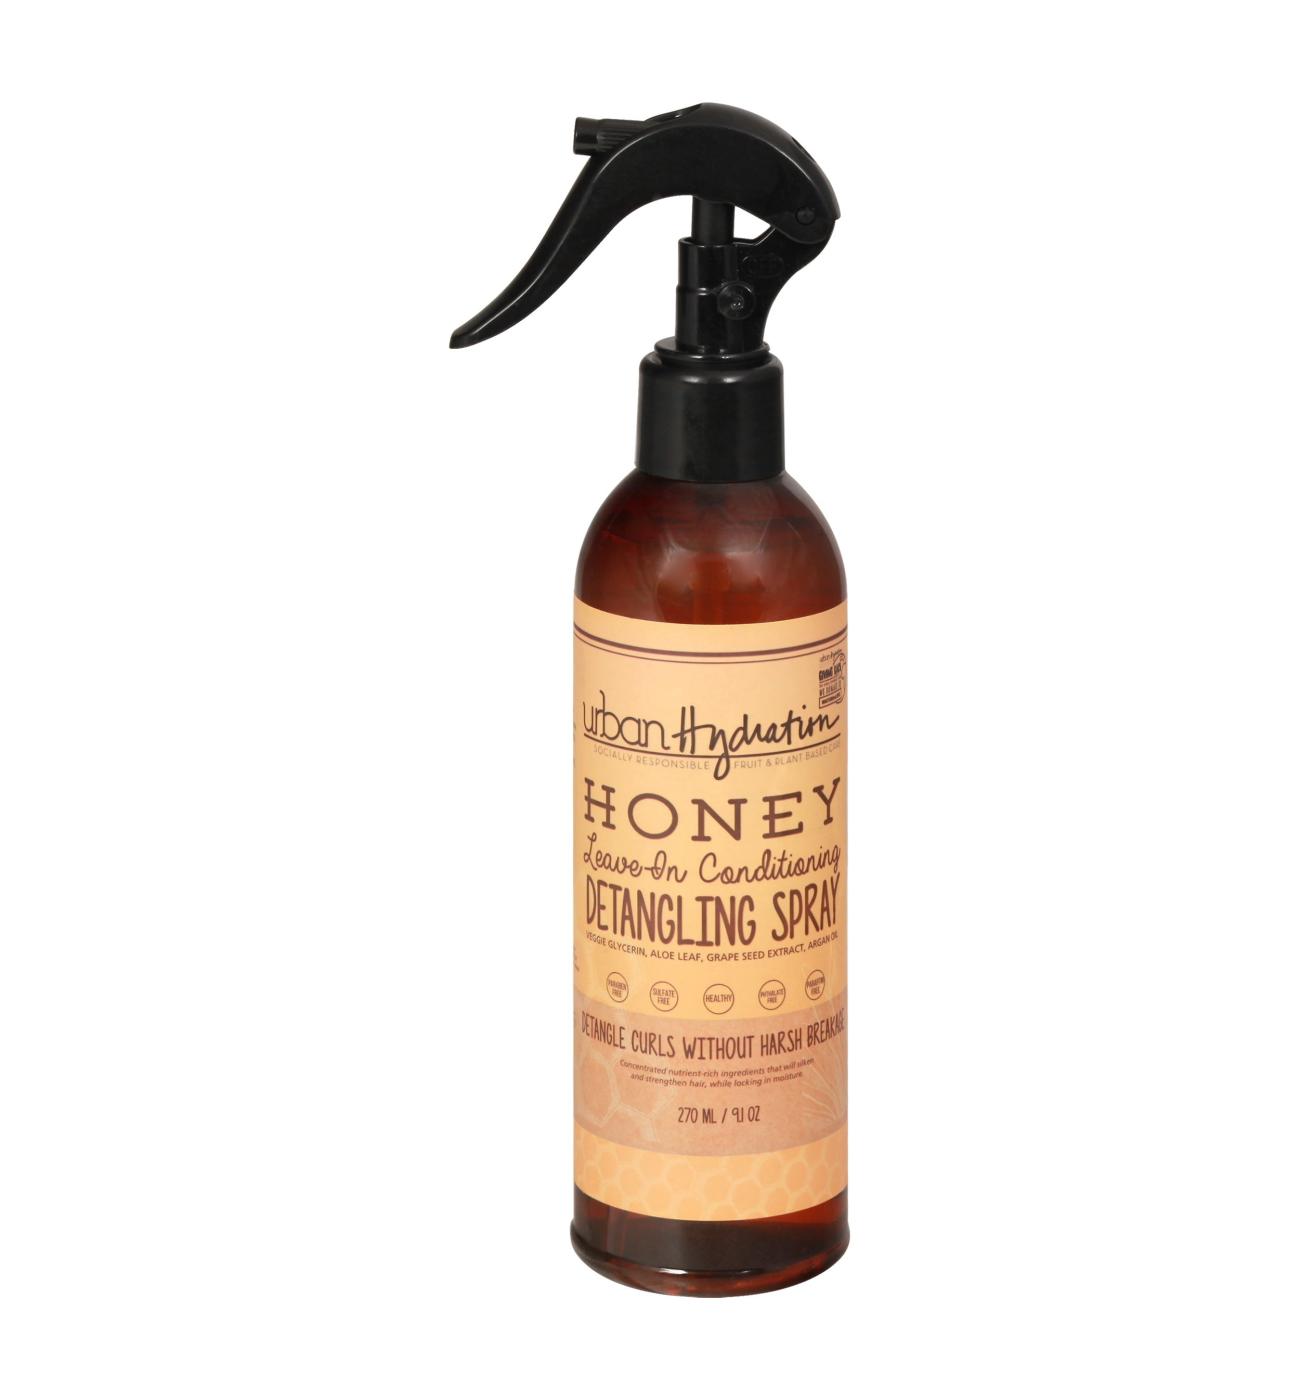 Urban Hydration Honey Leave-In Conditioning Detangling Spray; image 1 of 2